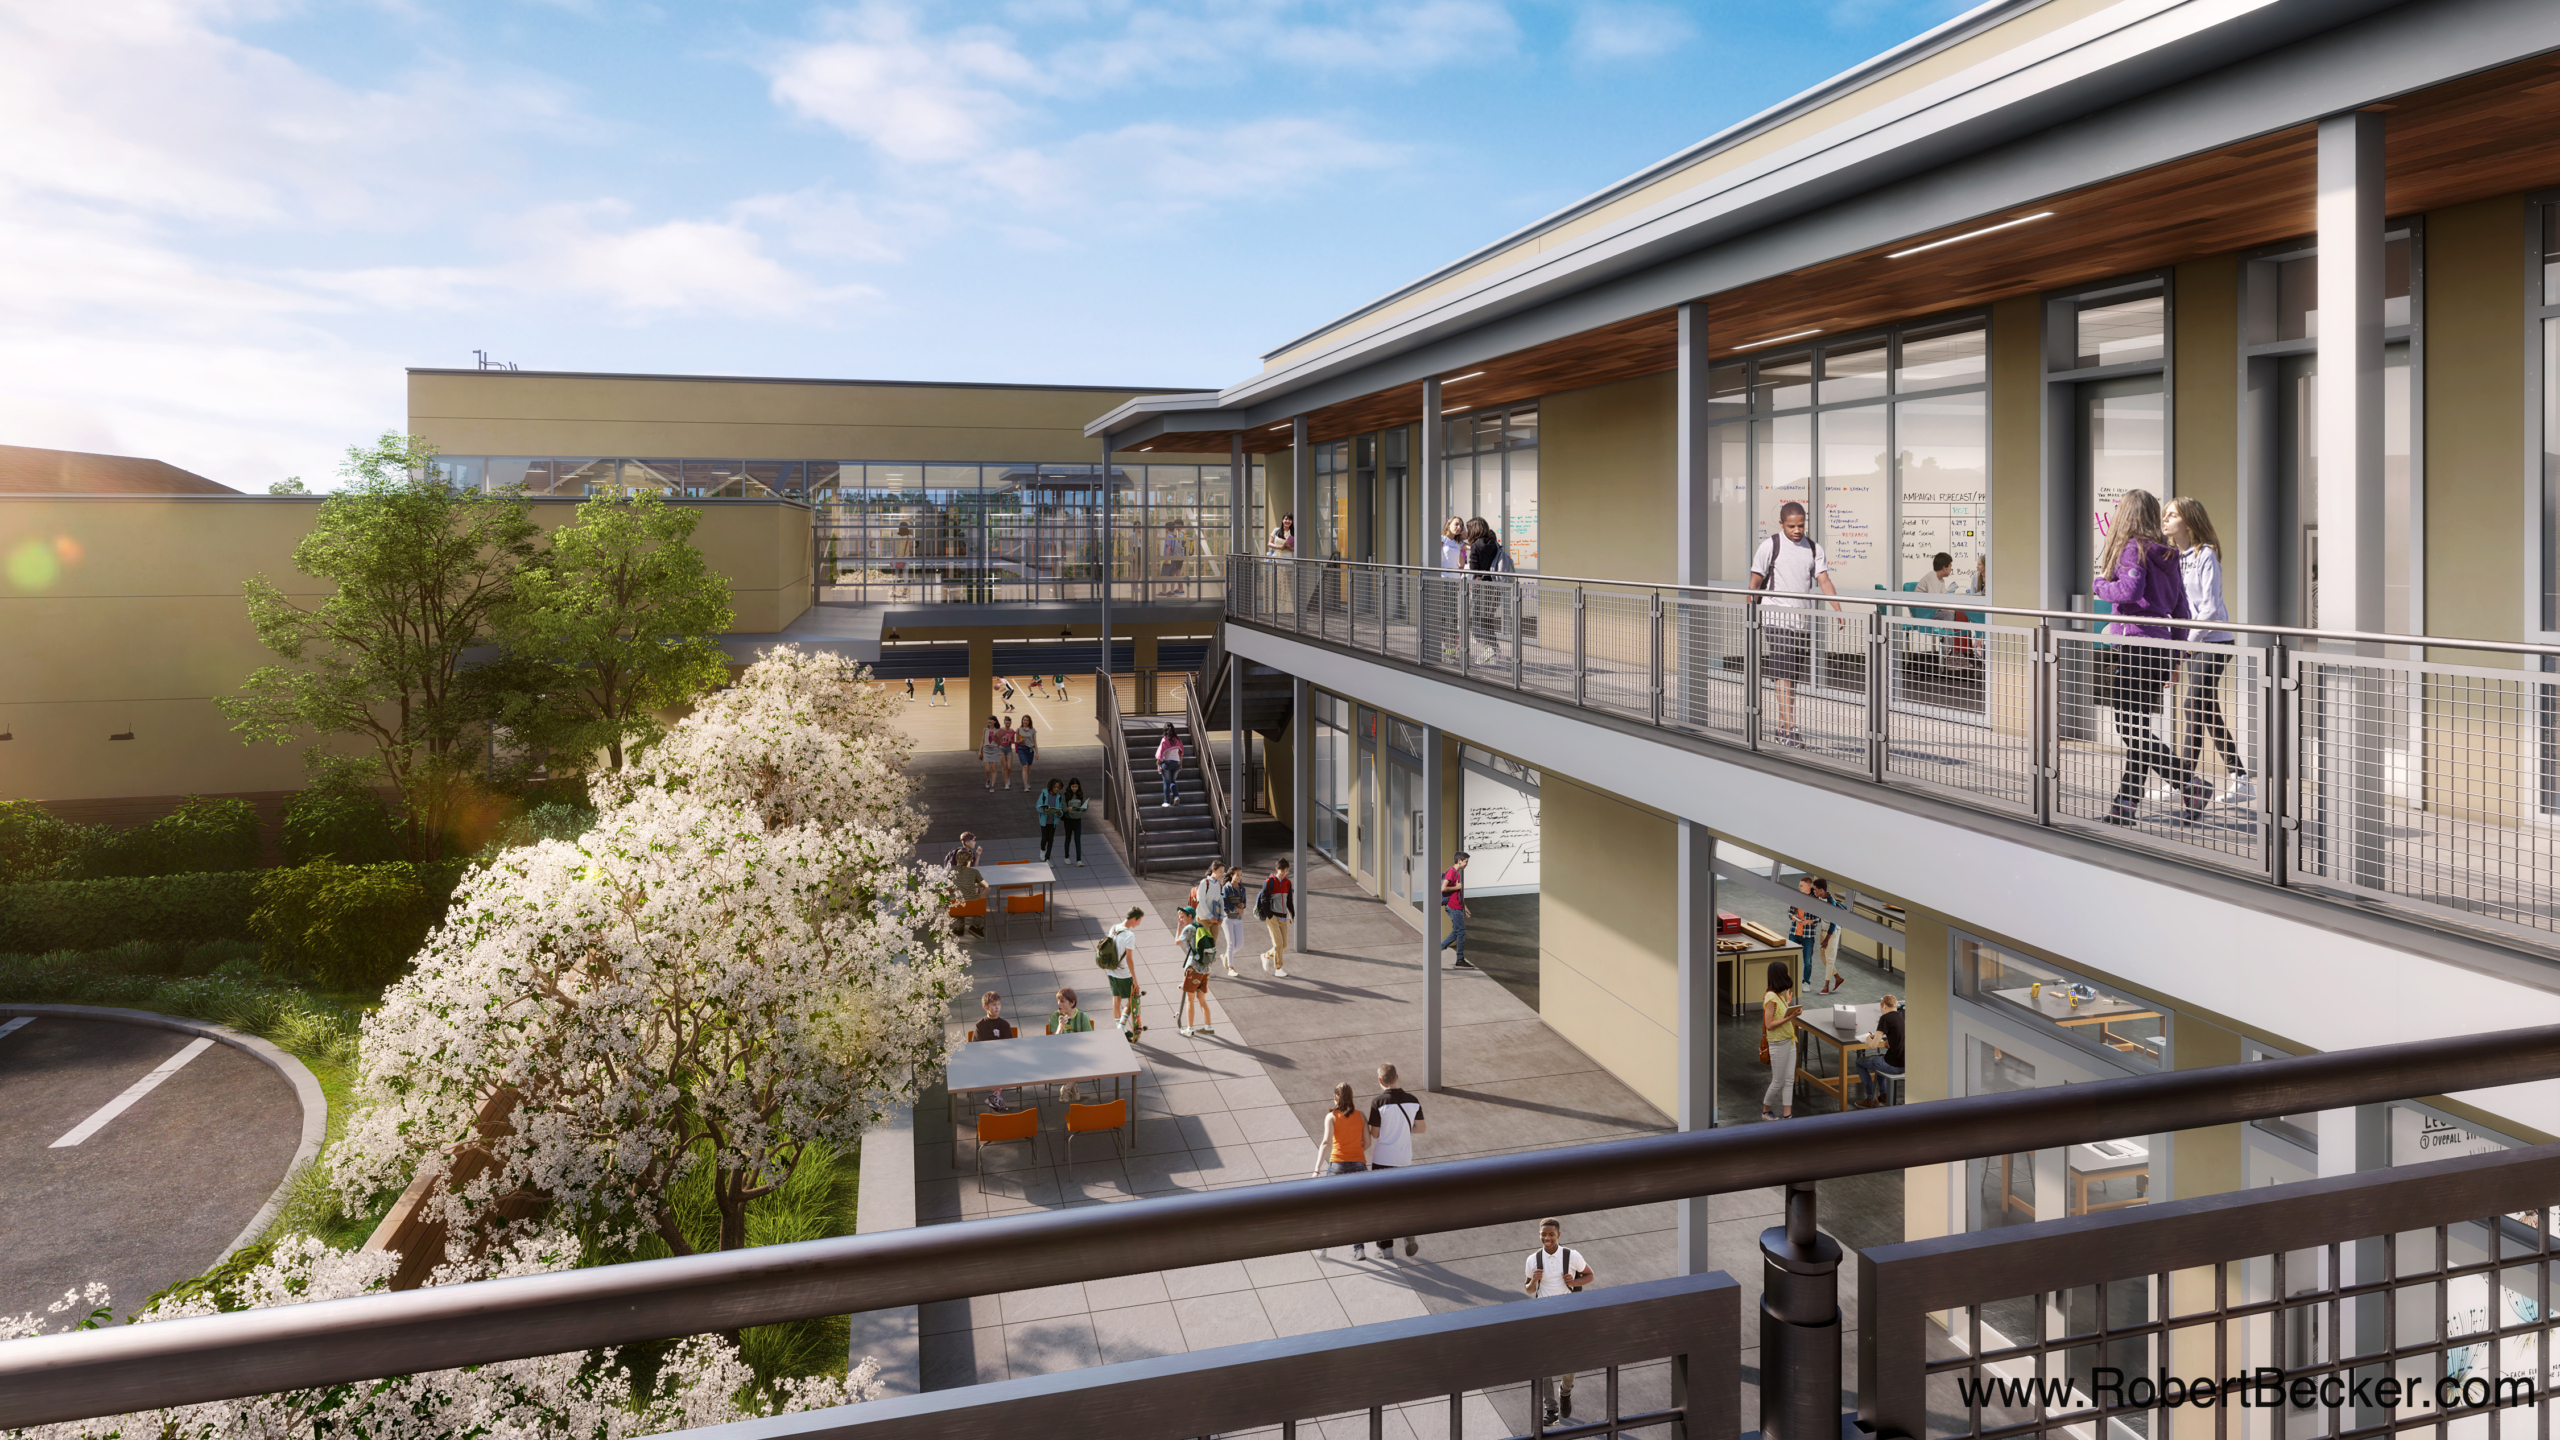 Middle School Architectural Rendering